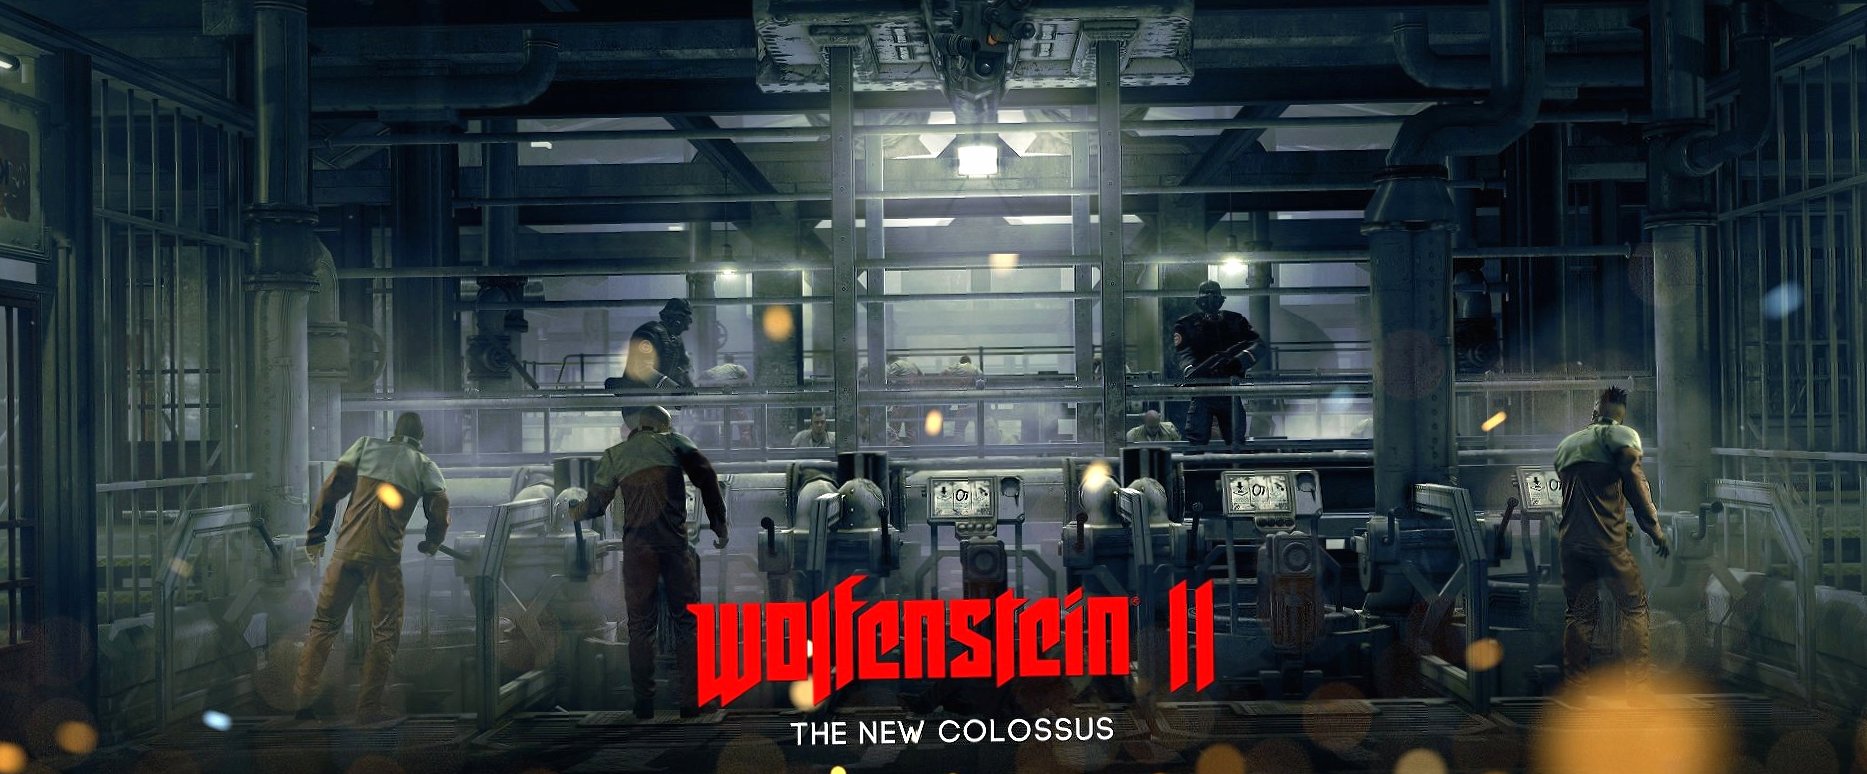 Wolfenstein II The New Colossus wallpapers HD quality